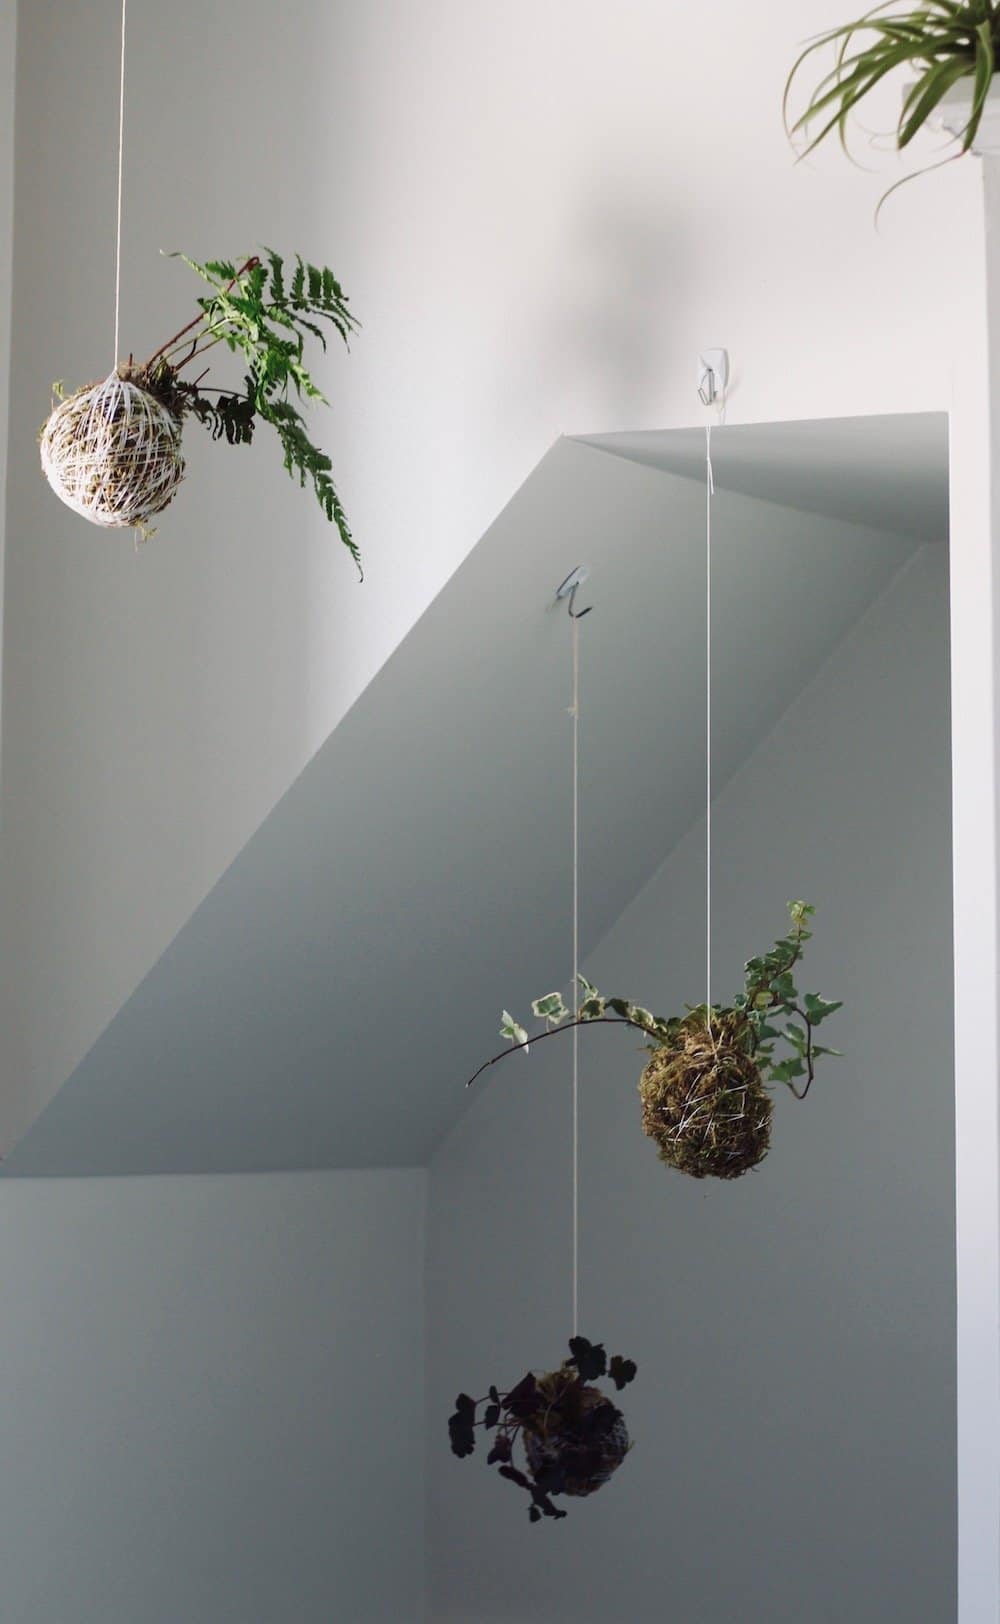 You might want to find some moss to make this gorgeous hanging plant! This kokedama moss ball is an easy way to bring greenery into your home year-round. #kokedama #mossball #kokedamamossball #stringgarden #moss